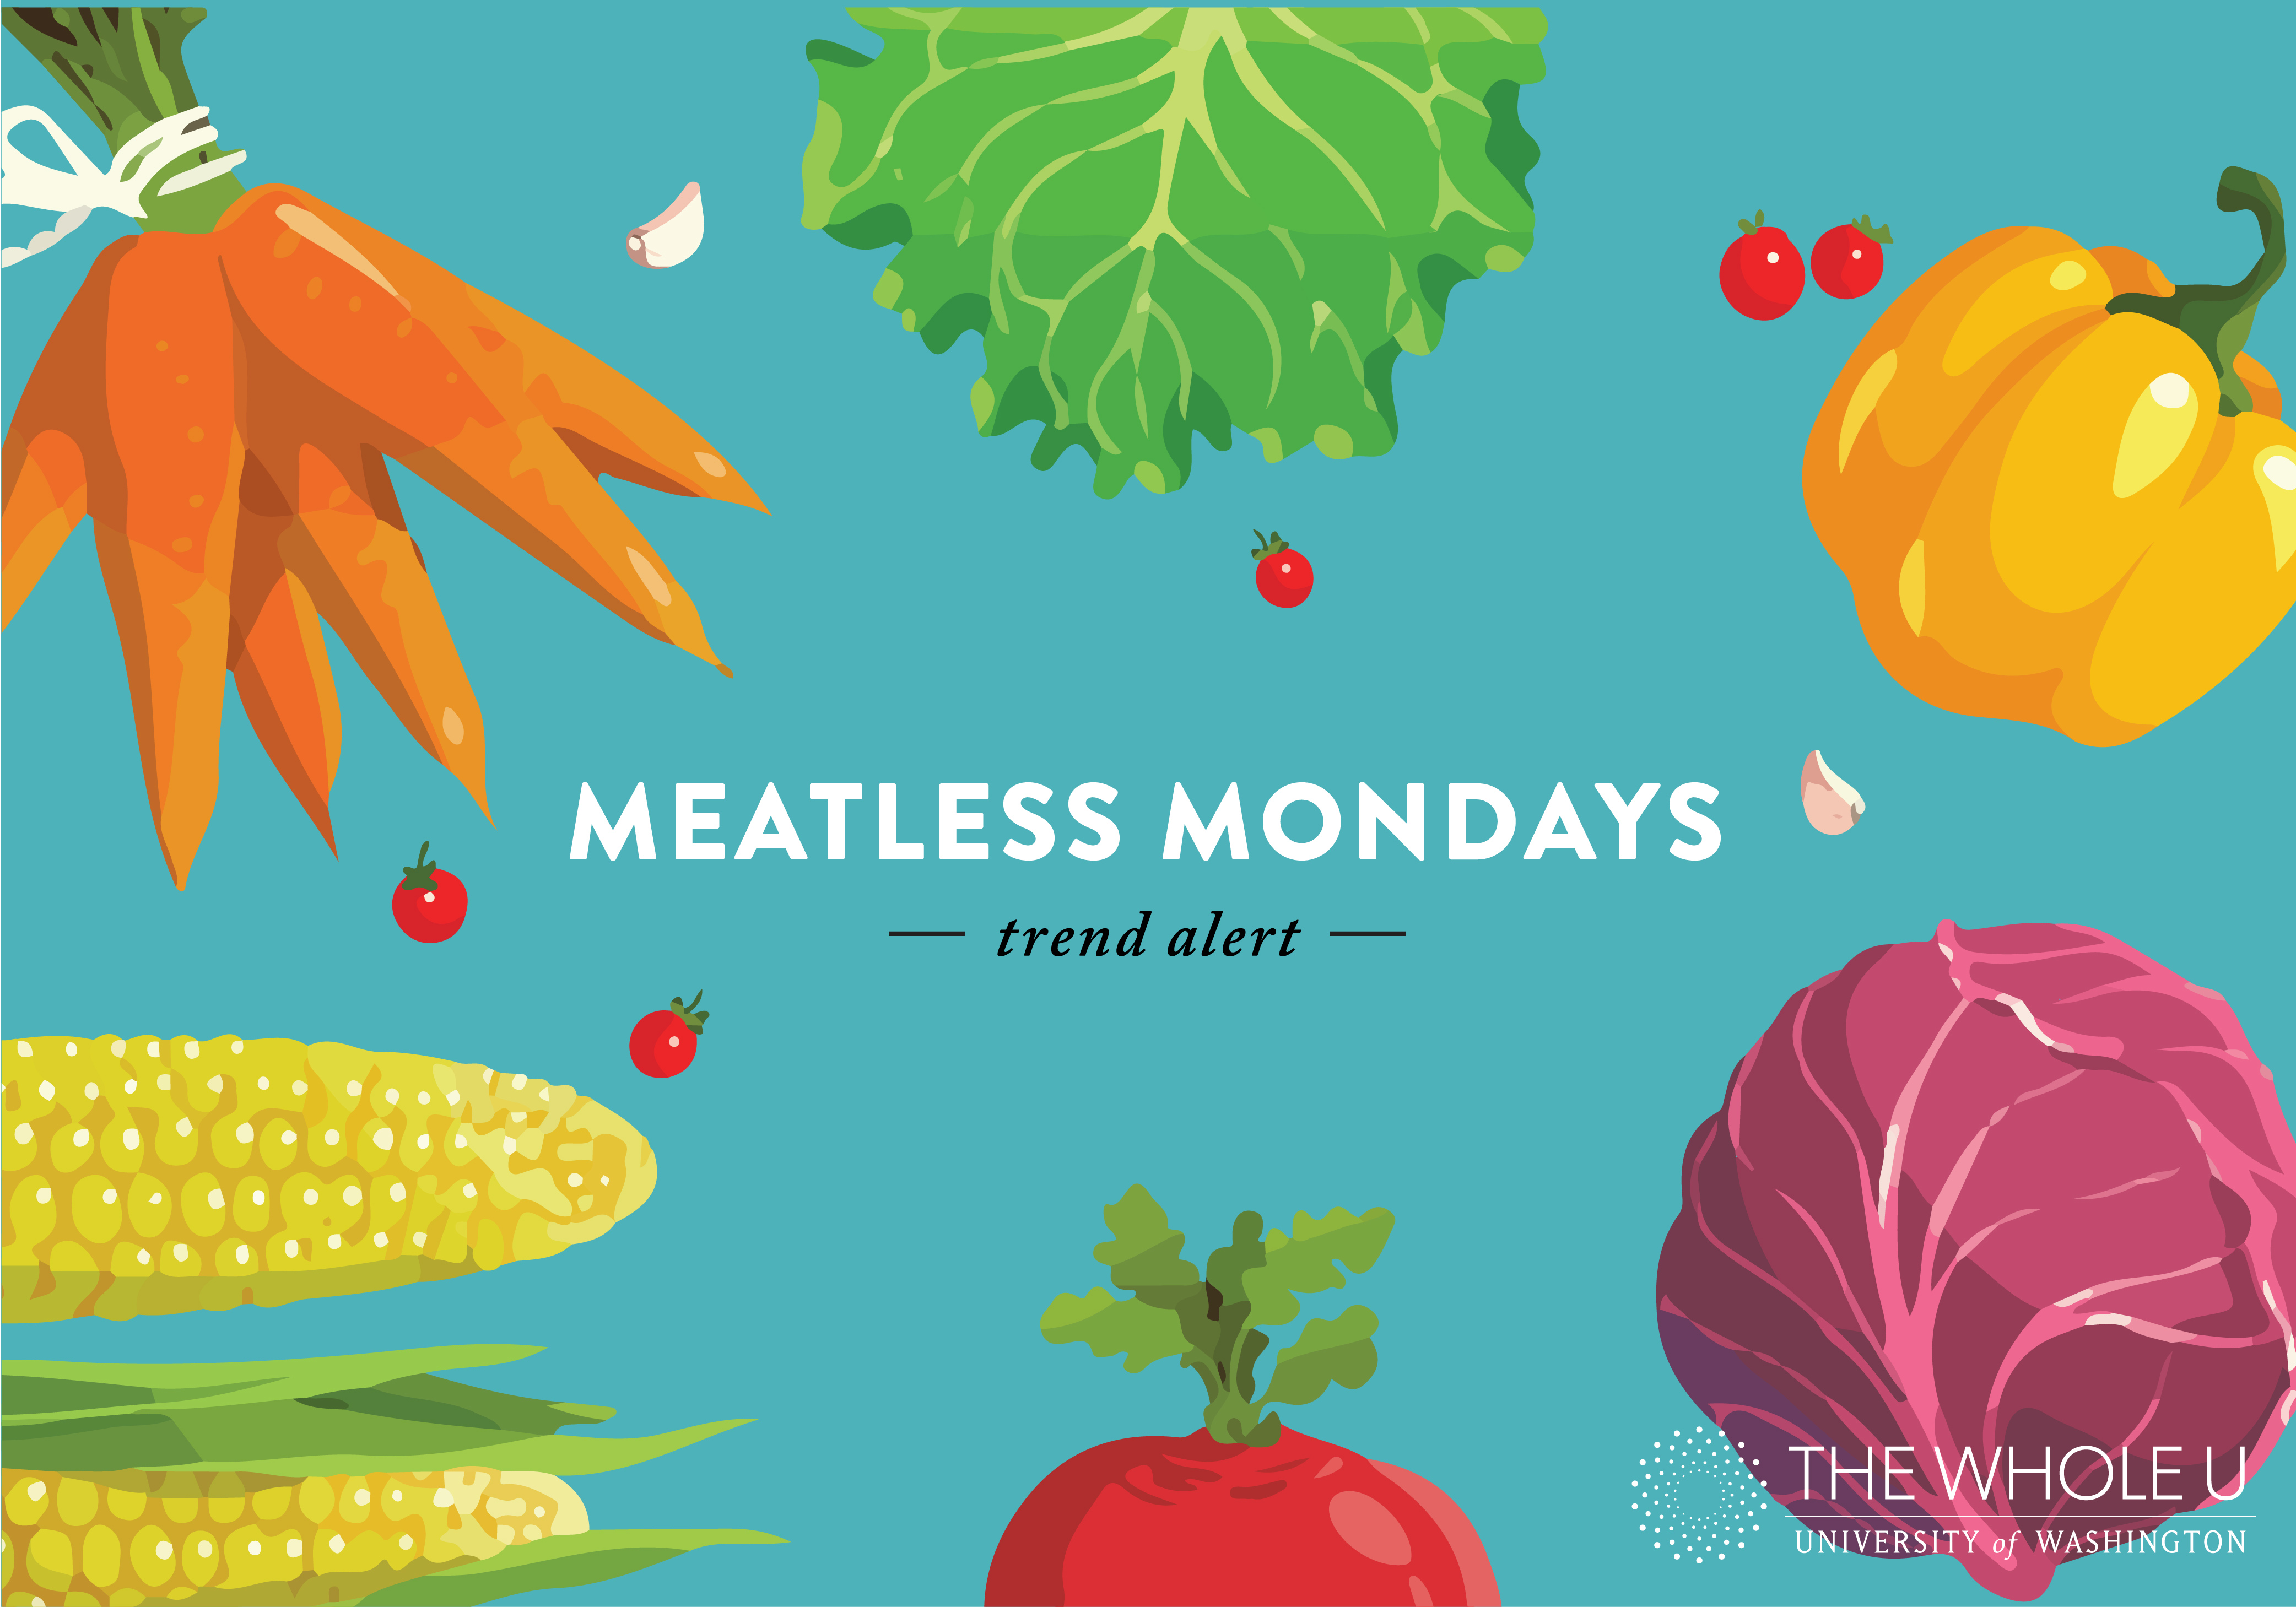 Ask a Dietitian: Meatless Mondays? | The Whole U